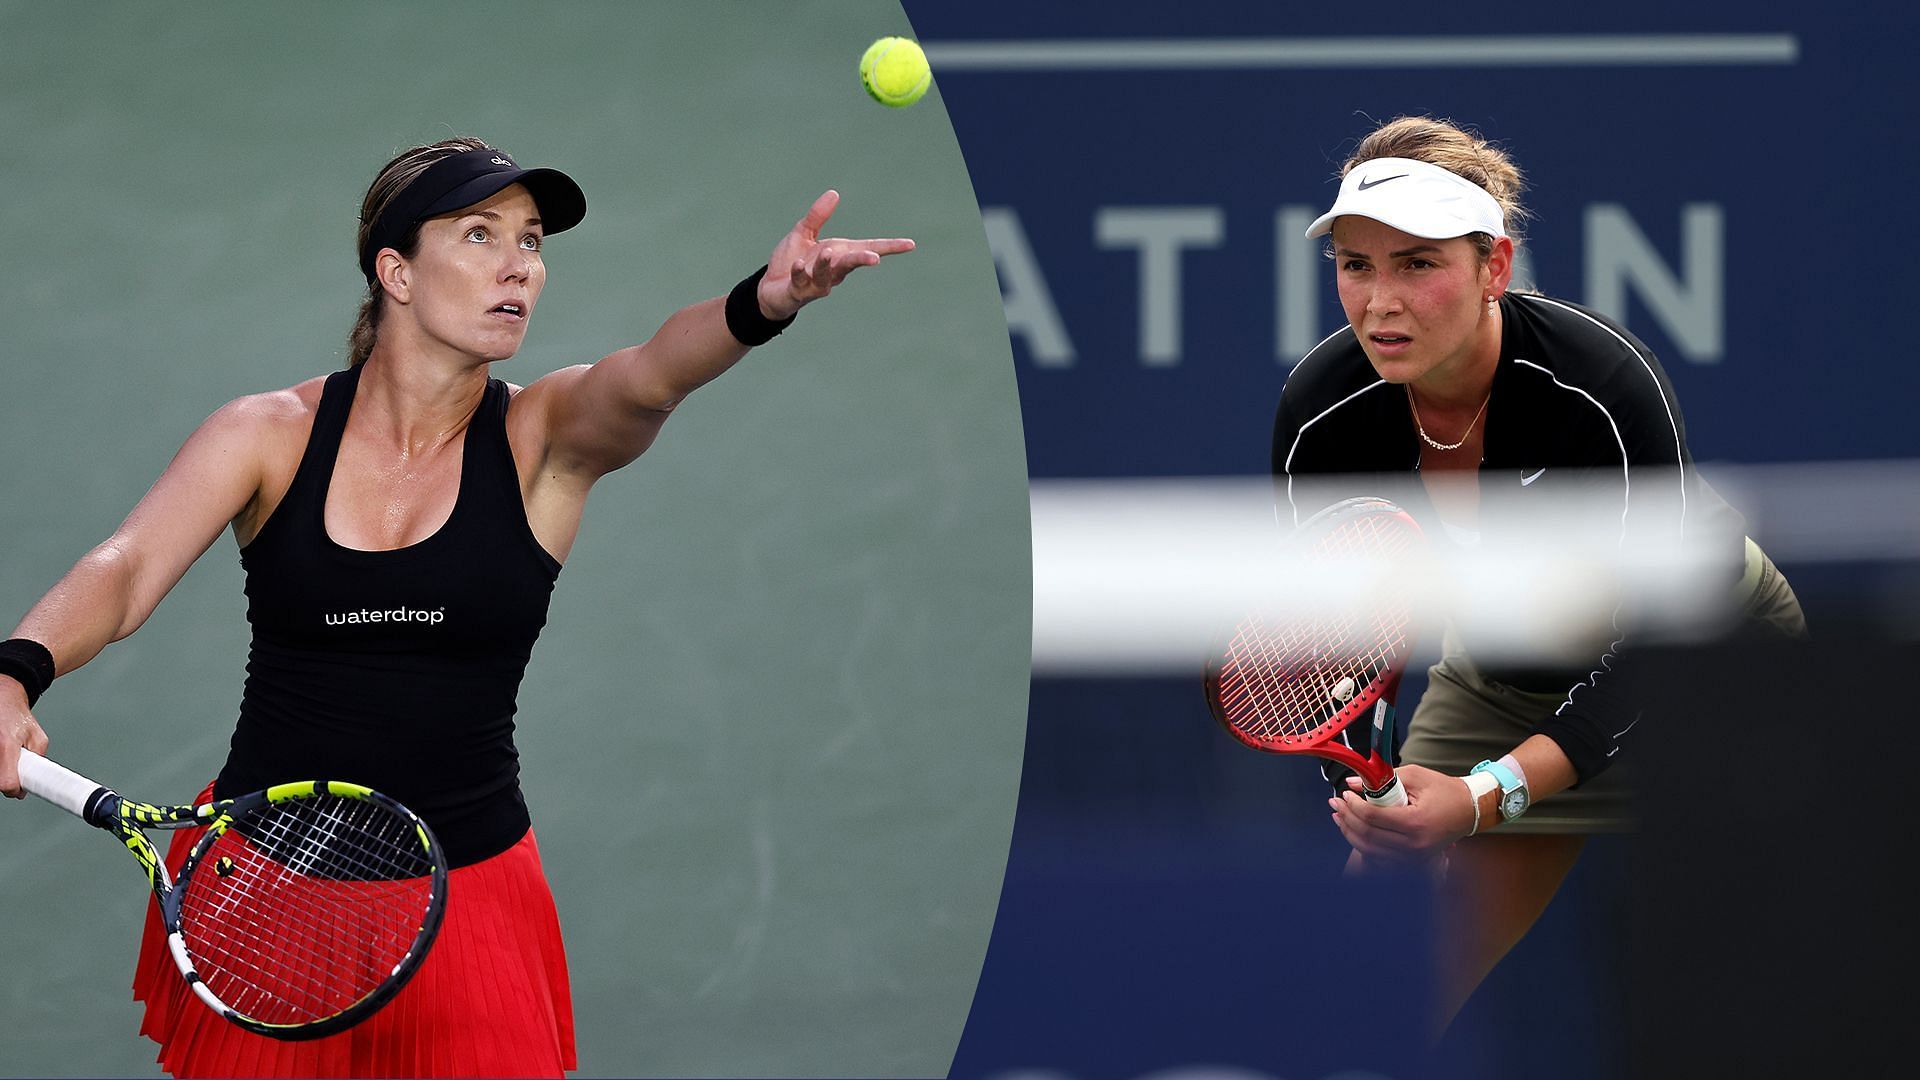 San Diego Open 2022 Danielle Collins vs Donna Vekic preview, head-to-head, prediction, odds and pick